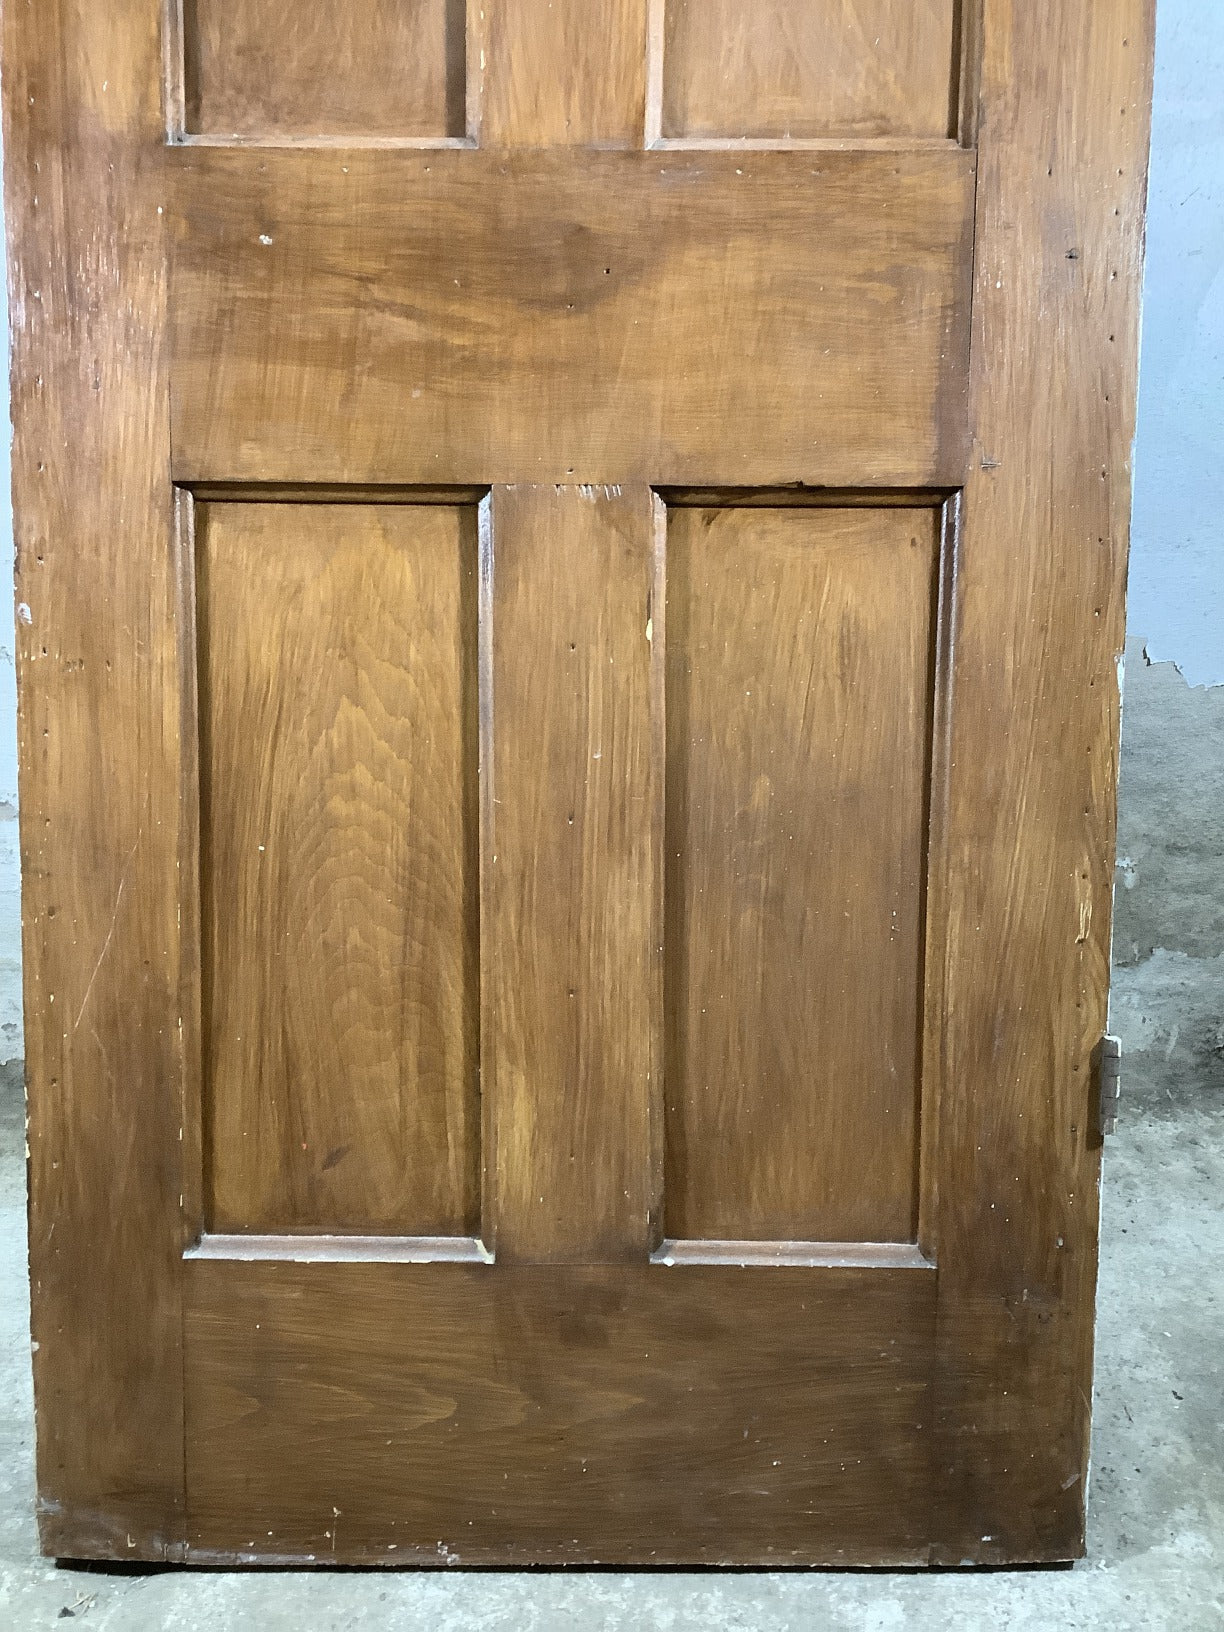 27 3/4"X75 1/4" 1930s Internal Stained Pine Four Panel Door 2over2 Reclamation